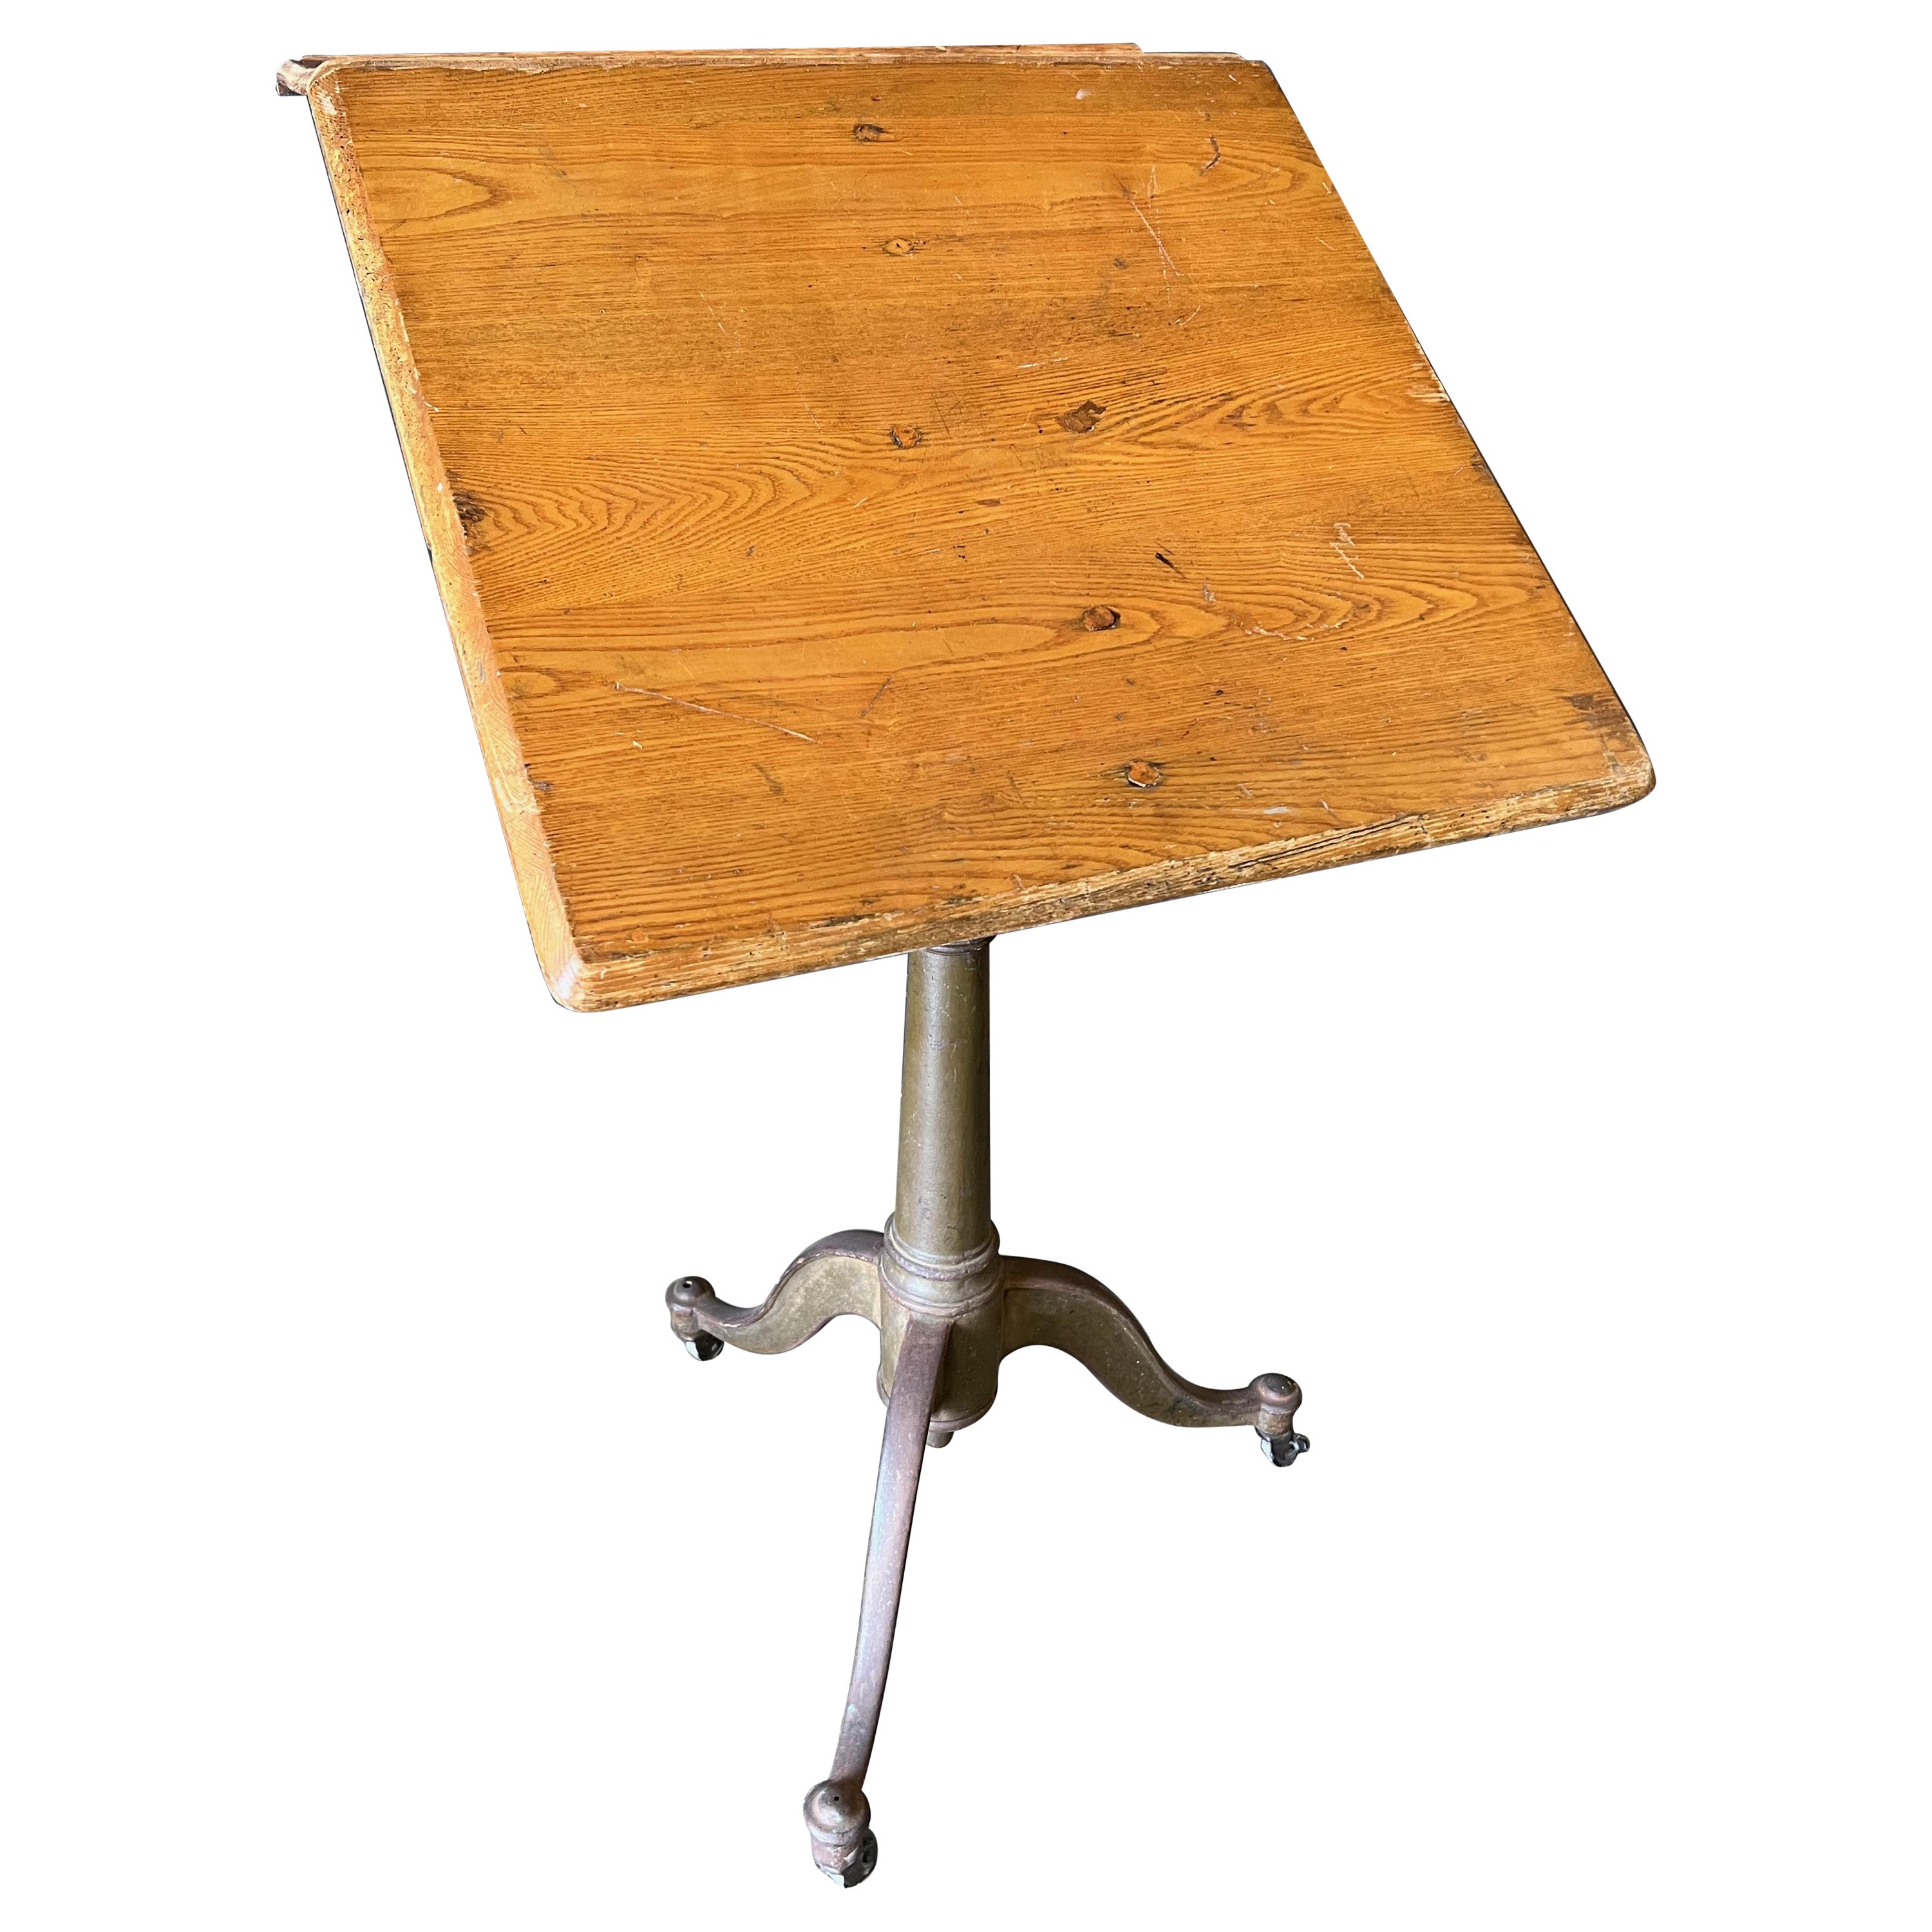 What is the best drafting table?